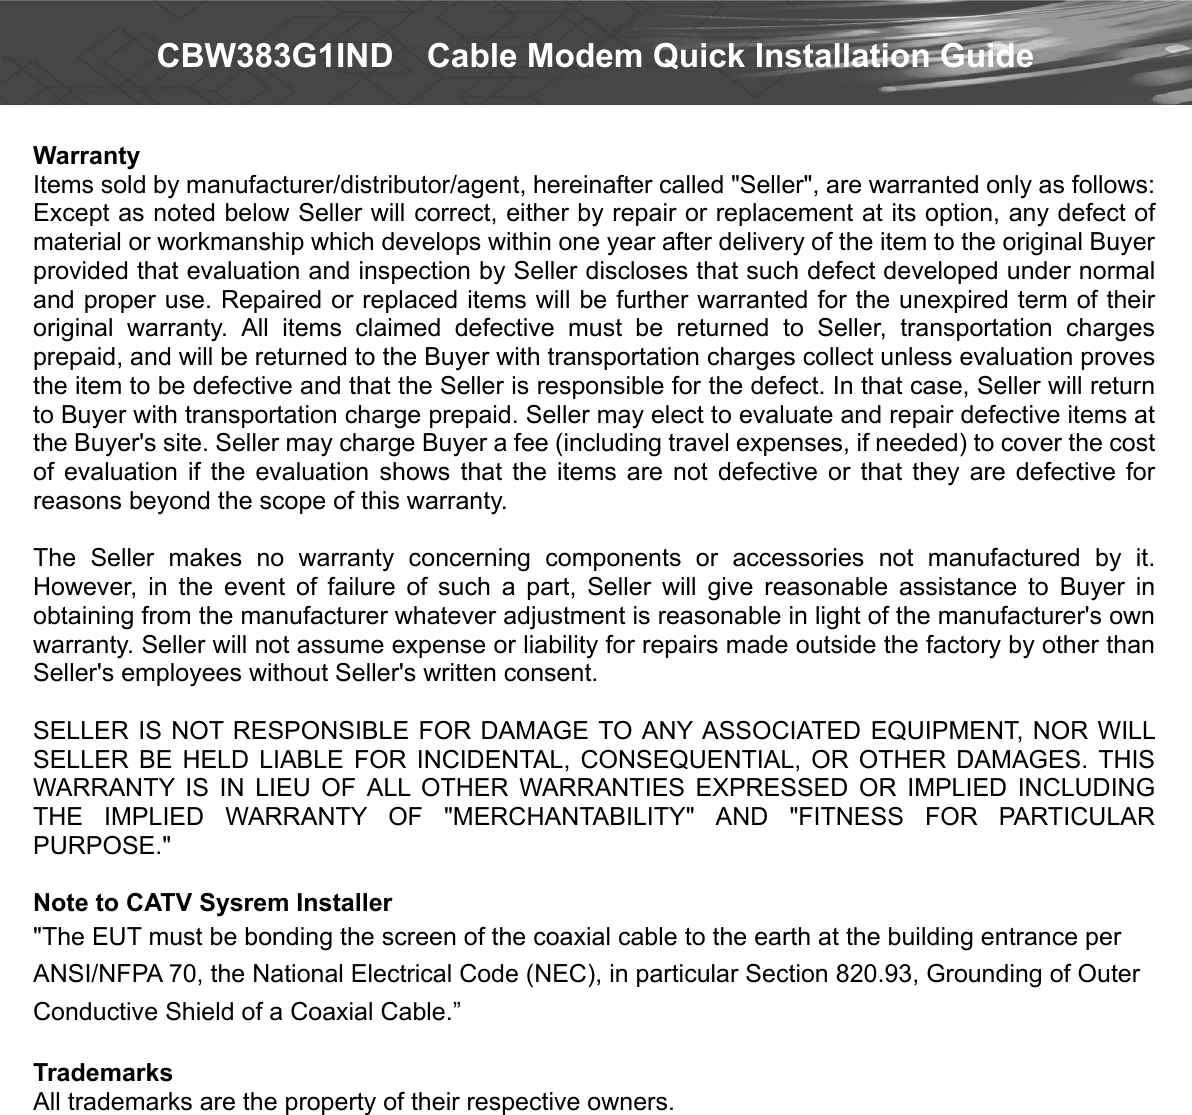  CBW383G1IND    Cable Modem Quick Installation Guide  Warranty   Items sold by manufacturer/distributor/agent, hereinafter called &quot;Seller&quot;, are warranted only as follows: Except as noted below Seller will correct, either by repair or replacement at its option, any defect of material or workmanship which develops within one year after delivery of the item to the original Buyer provided that evaluation and inspection by Seller discloses that such defect developed under normal and proper use. Repaired or replaced items will be further warranted for the unexpired term of their original  warranty.  All  items  claimed  defective  must  be  returned  to  Seller,  transportation  charges prepaid, and will be returned to the Buyer with transportation charges collect unless evaluation proves the item to be defective and that the Seller is responsible for the defect. In that case, Seller will return to Buyer with transportation charge prepaid. Seller may elect to evaluate and repair defective items at the Buyer&apos;s site. Seller may charge Buyer a fee (including travel expenses, if needed) to cover the cost of  evaluation  if  the  evaluation  shows  that  the items  are not  defective or  that  they  are  defective  for reasons beyond the scope of this warranty.  The  Seller  makes  no  warranty  concerning  components  or  accessories  not  manufactured  by  it. However,  in  the  event  of  failure  of  such  a  part,  Seller  will  give  reasonable  assistance  to  Buyer  in obtaining from the manufacturer whatever adjustment is reasonable in light of the manufacturer&apos;s own warranty. Seller will not assume expense or liability for repairs made outside the factory by other than Seller&apos;s employees without Seller&apos;s written consent.  SELLER IS NOT RESPONSIBLE FOR DAMAGE TO ANY ASSOCIATED EQUIPMENT, NOR WILL SELLER  BE  HELD  LIABLE  FOR  INCIDENTAL,  CONSEQUENTIAL,  OR  OTHER  DAMAGES.  THIS WARRANTY  IS  IN  LIEU  OF  ALL  OTHER  WARRANTIES  EXPRESSED  OR  IMPLIED  INCLUDING THE  IMPLIED  WARRANTY  OF  &quot;MERCHANTABILITY&quot;  AND  &quot;FITNESS  FOR  PARTICULAR PURPOSE.&quot;  Note to CATV Sysrem Installer &quot;The EUT must be bonding the screen of the coaxial cable to the earth at the building entrance per ANSI/NFPA 70, the National Electrical Code (NEC), in particular Section 820.93, Grounding of Outer Conductive Shield of a Coaxial Cable.”  Trademarks All trademarks are the property of their respective owners.   